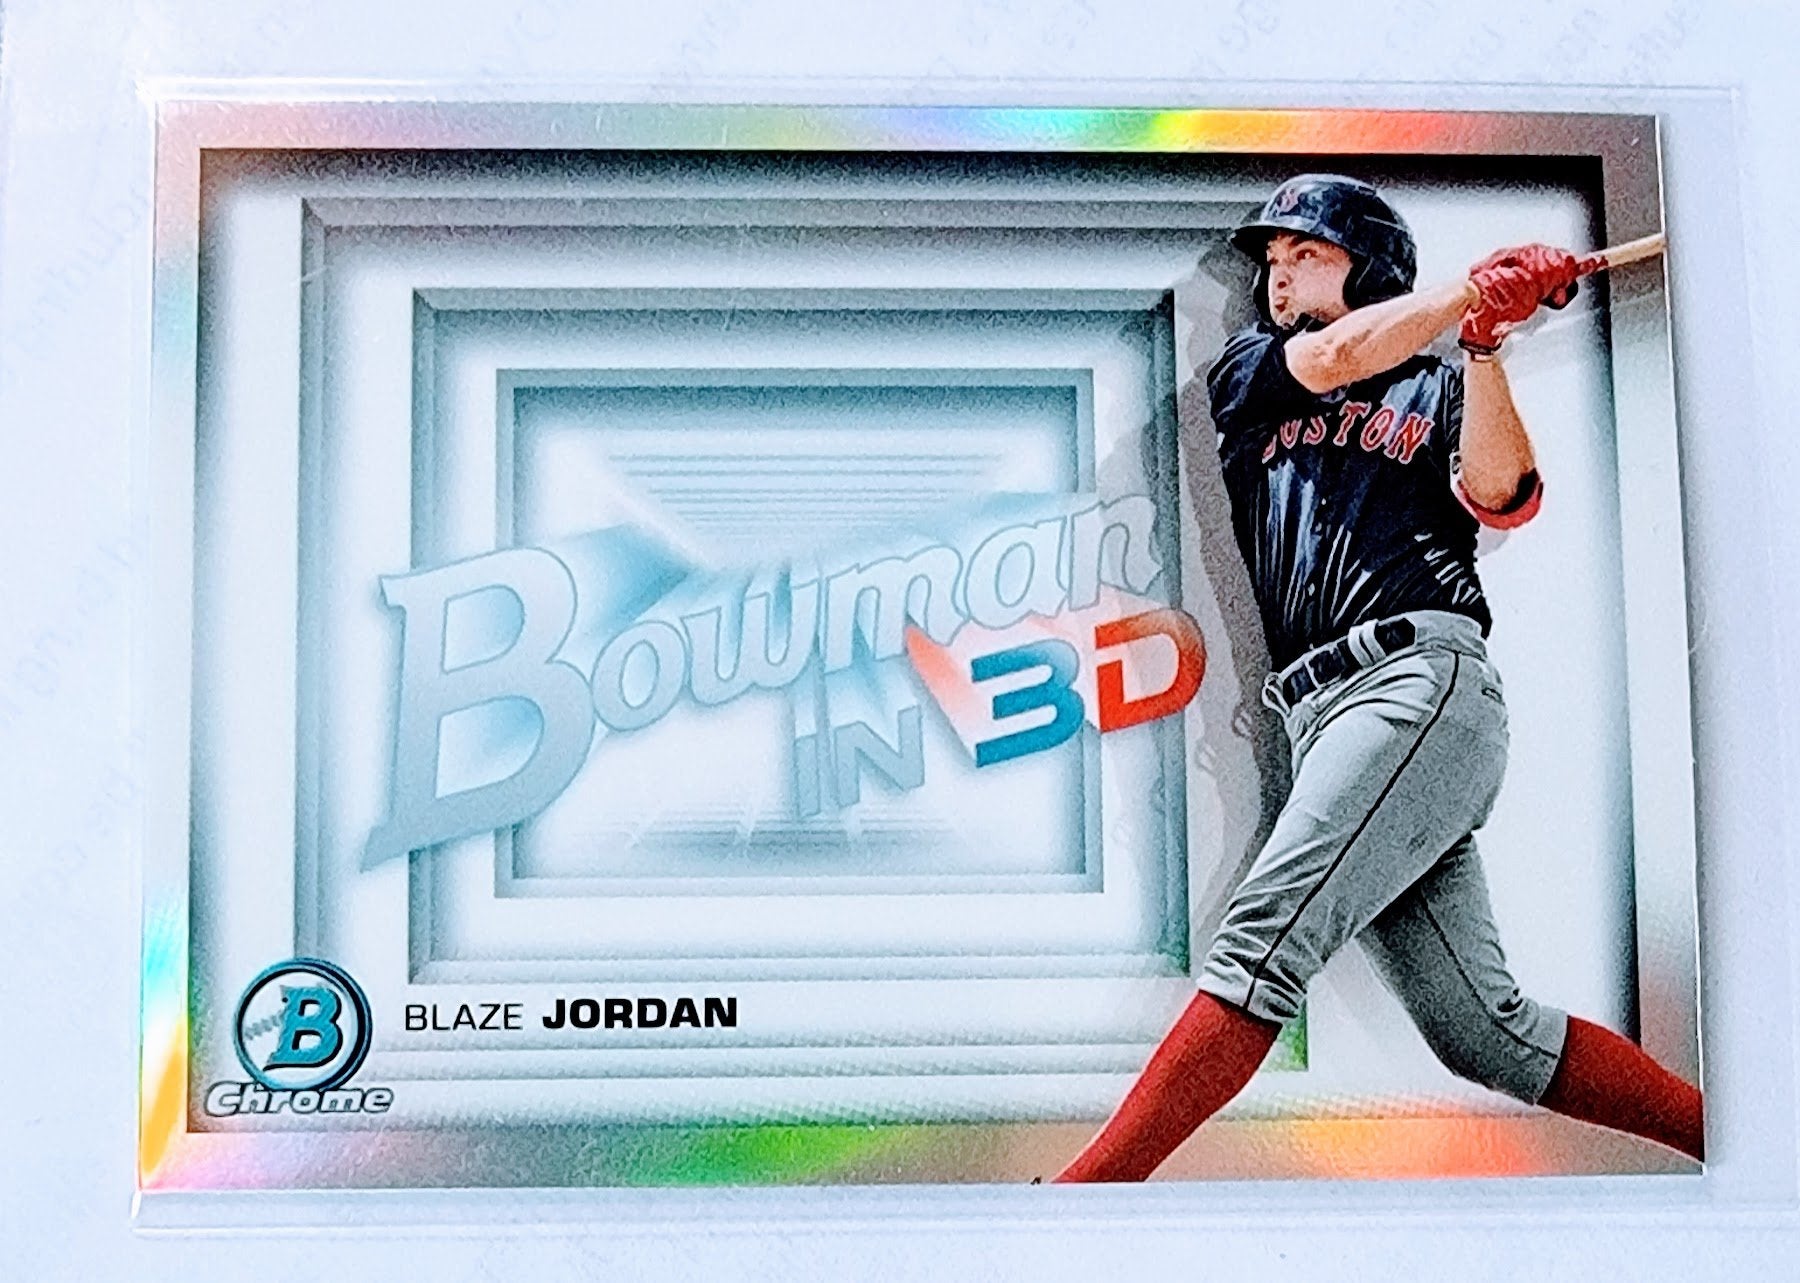 2022 Bowman Chrome Blaze Jordan Refractor In 3D Refractor Baseball Trading Card GRB1 simple Xclusive Collectibles   